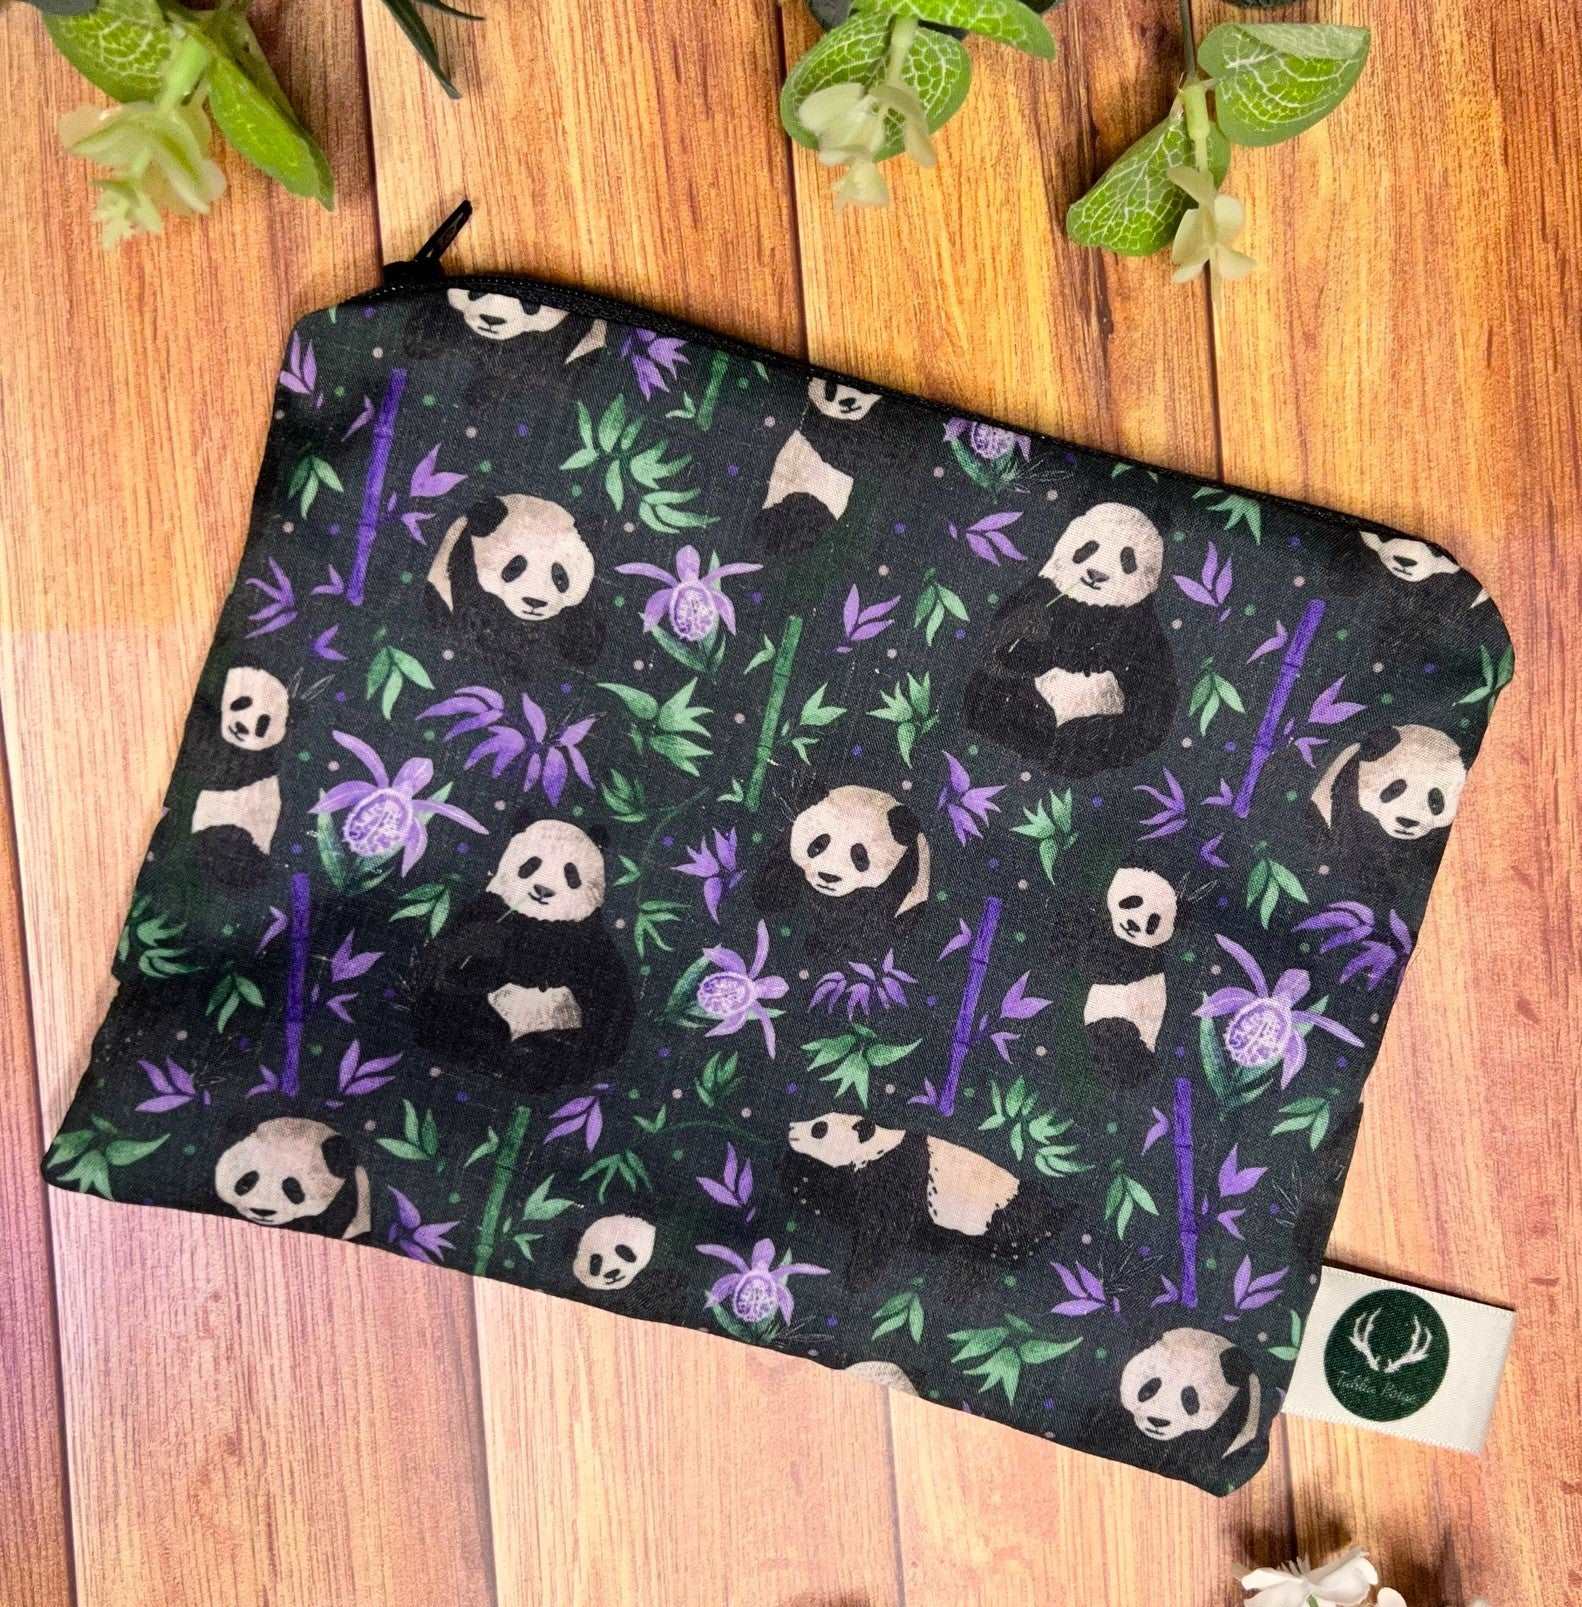 Make your own bag with our Panda sewing kit.